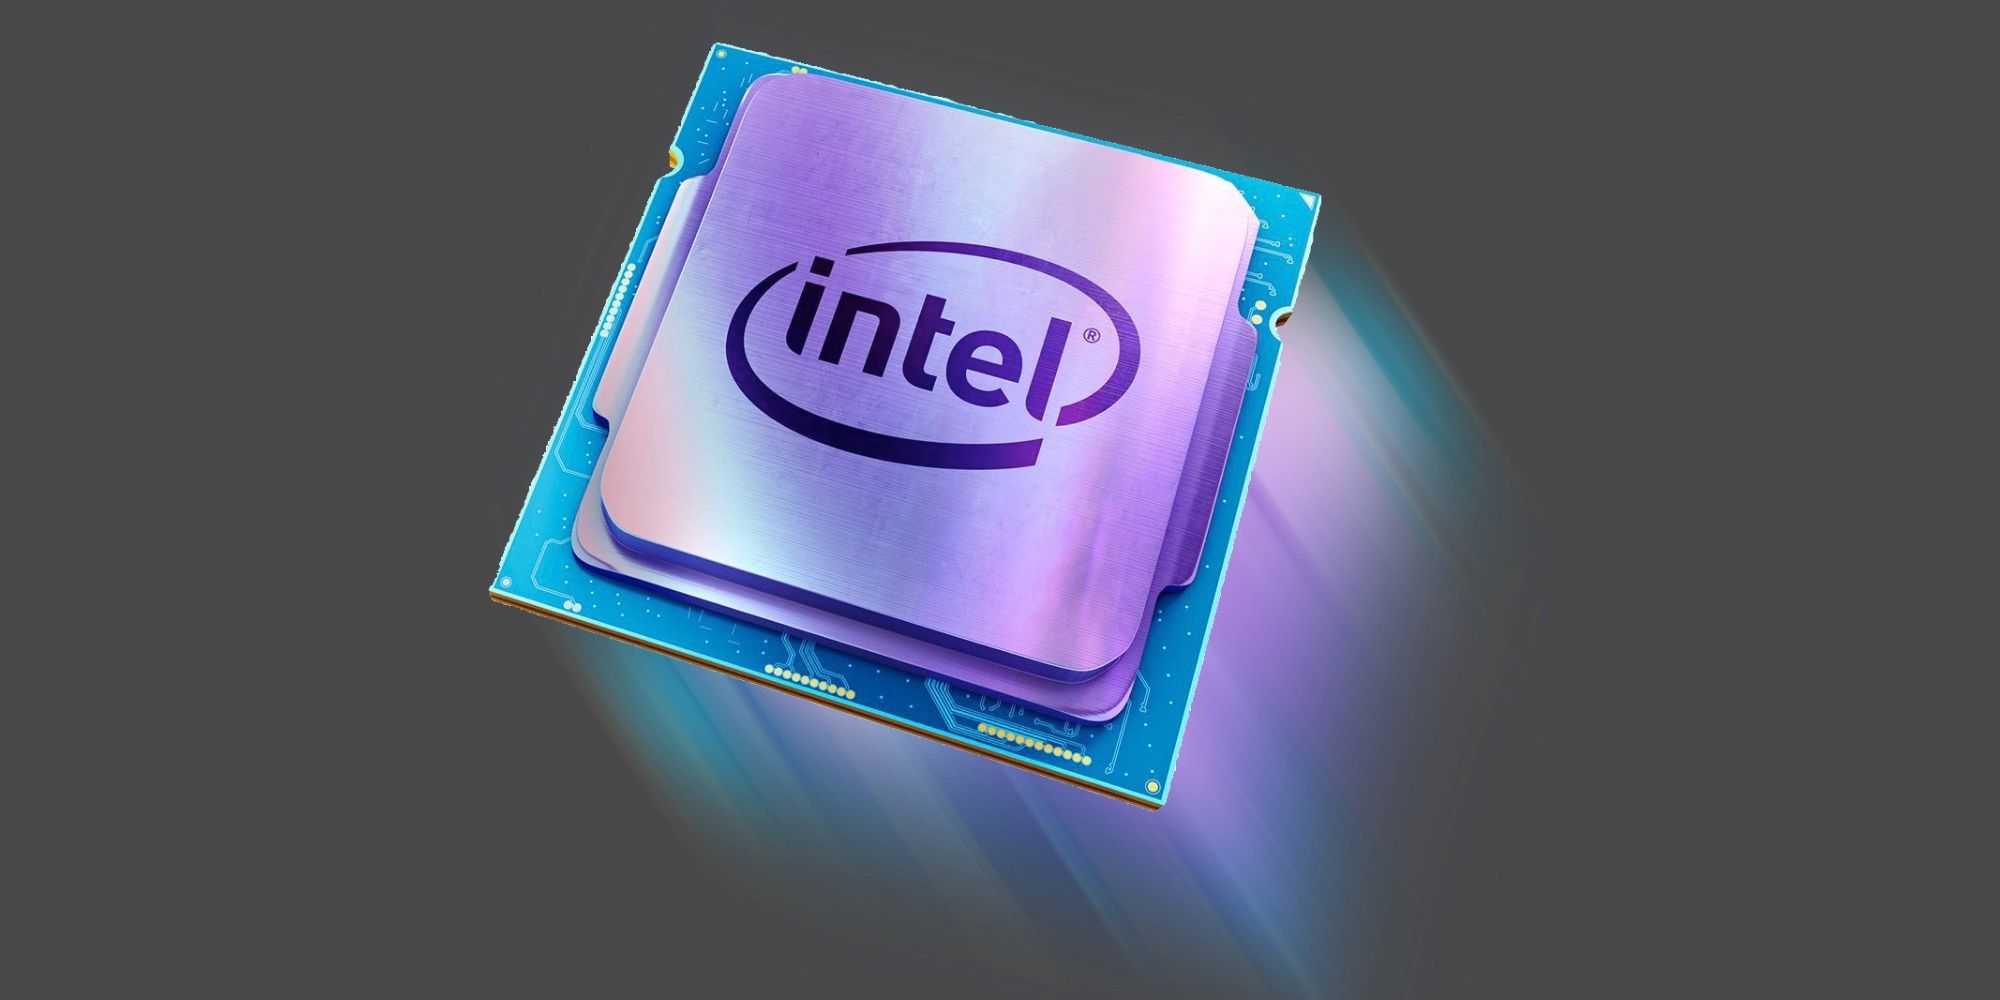 Intel Core i9-11900K Release Date: When To Expect The New Processor?